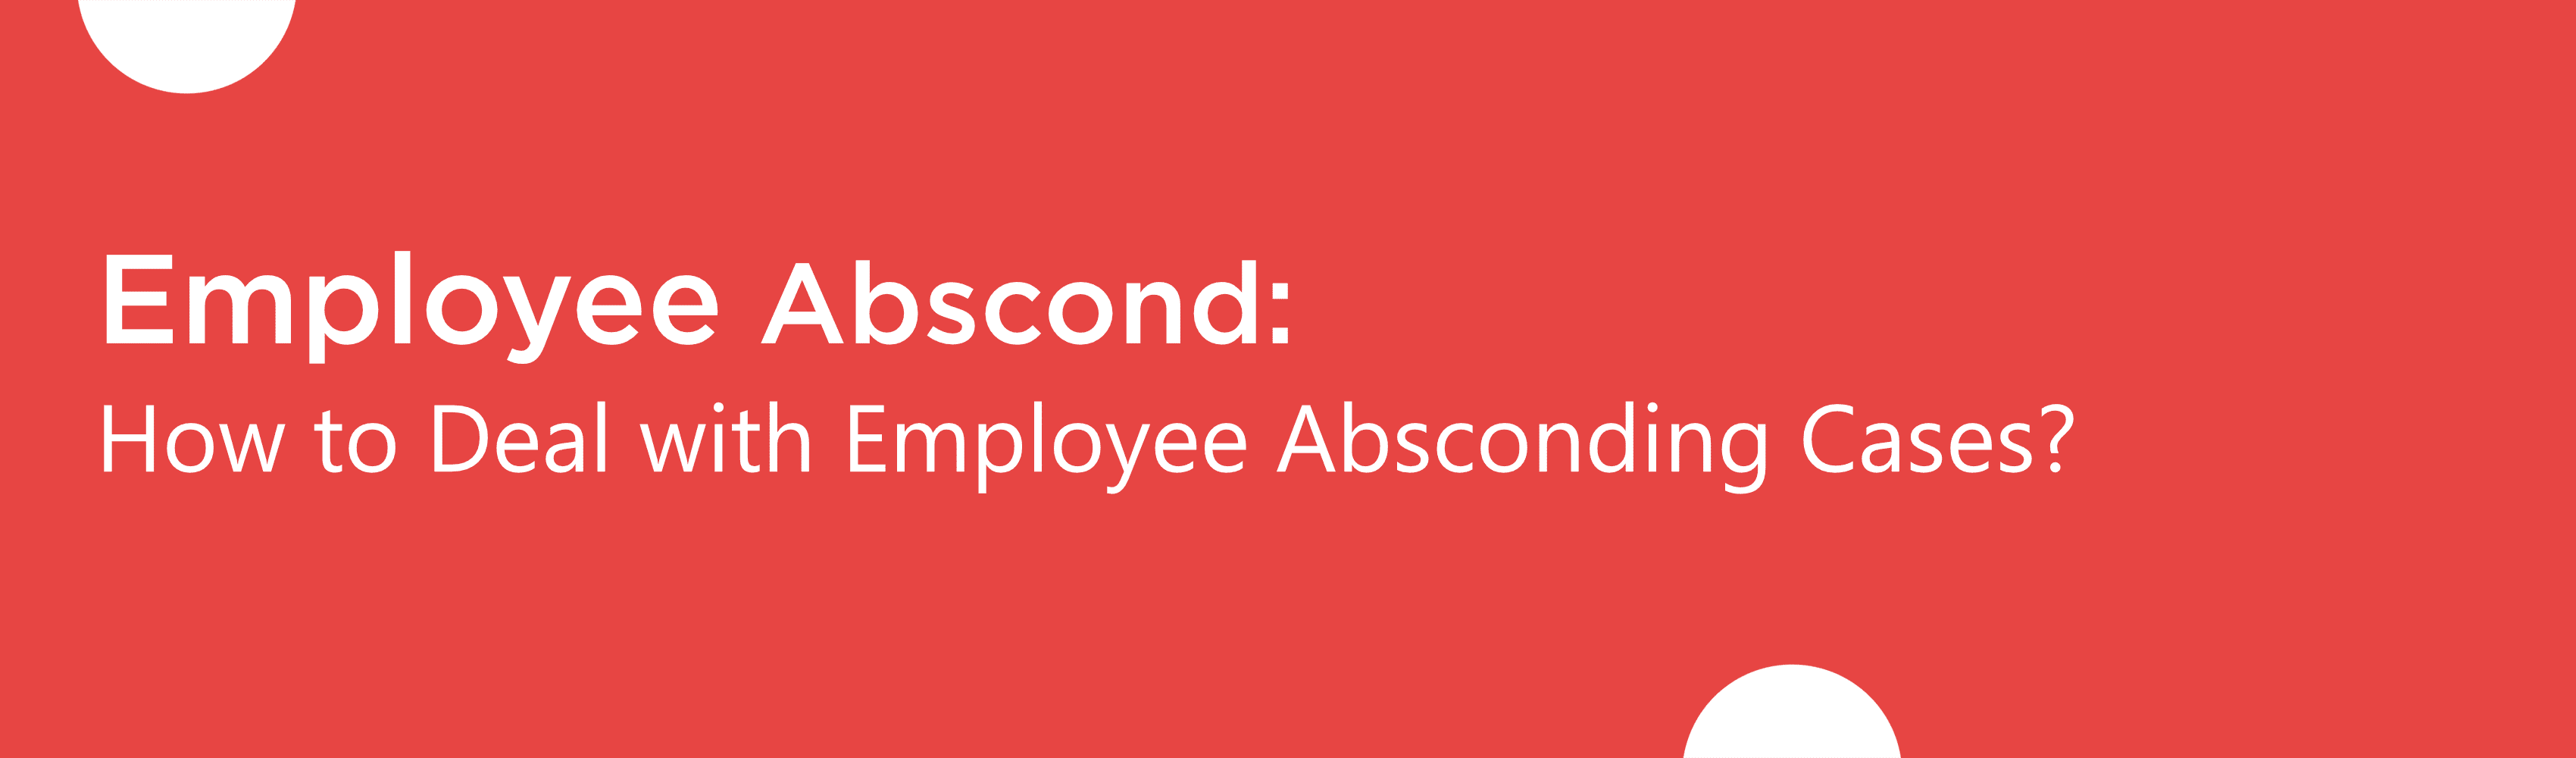 Employee Abscond: How to Deal with Employee Absconding Cases?